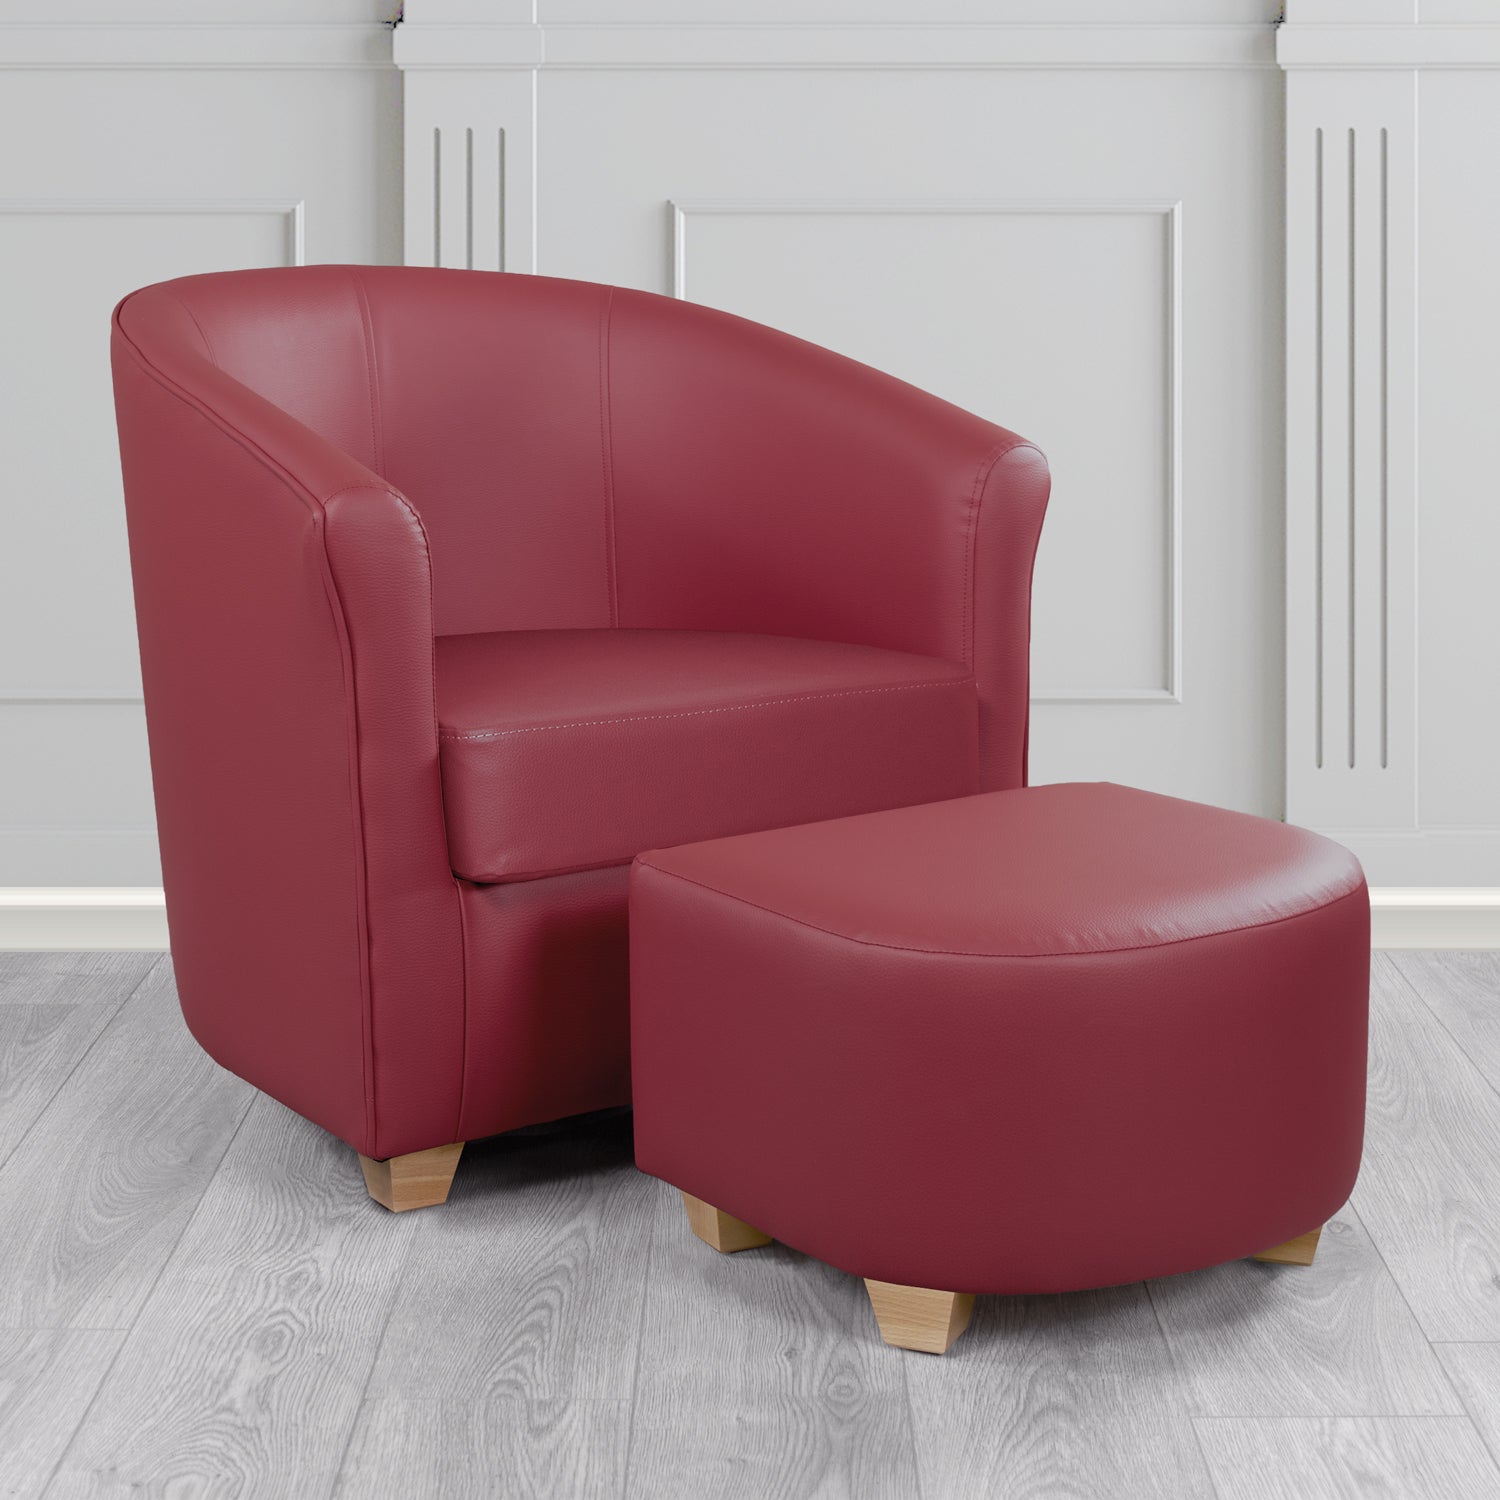 Cannes Tub Chair with Footstool Set in Just Colour Jazzberry Crib 5 Faux Leather - The Tub Chair Shop